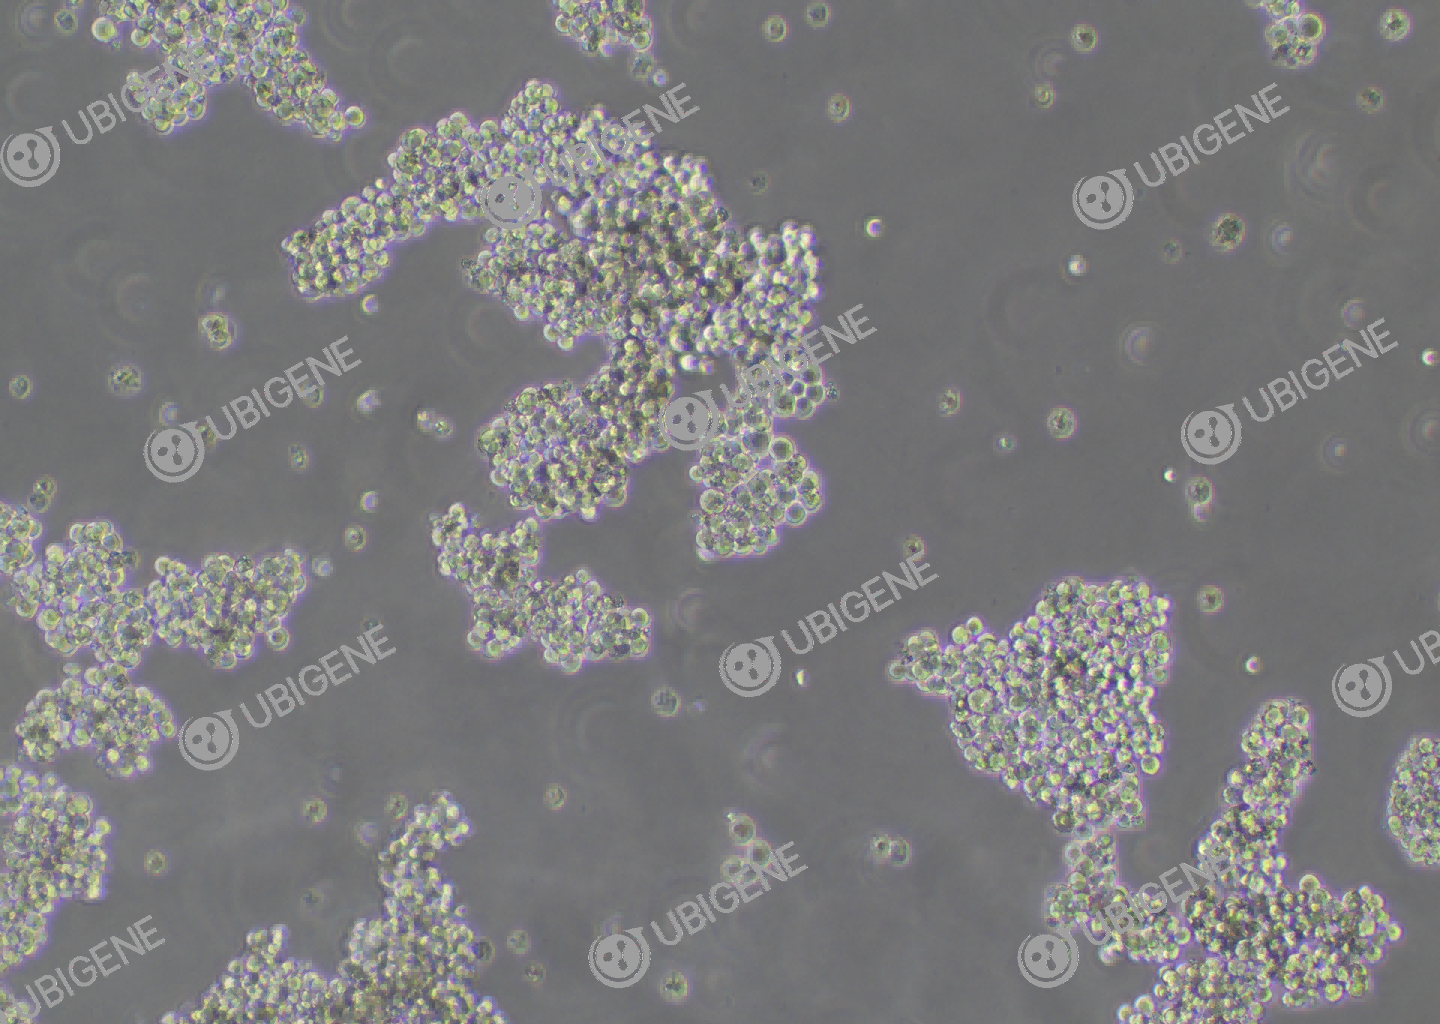 NCI-H716 cell line Cultured cell morphology